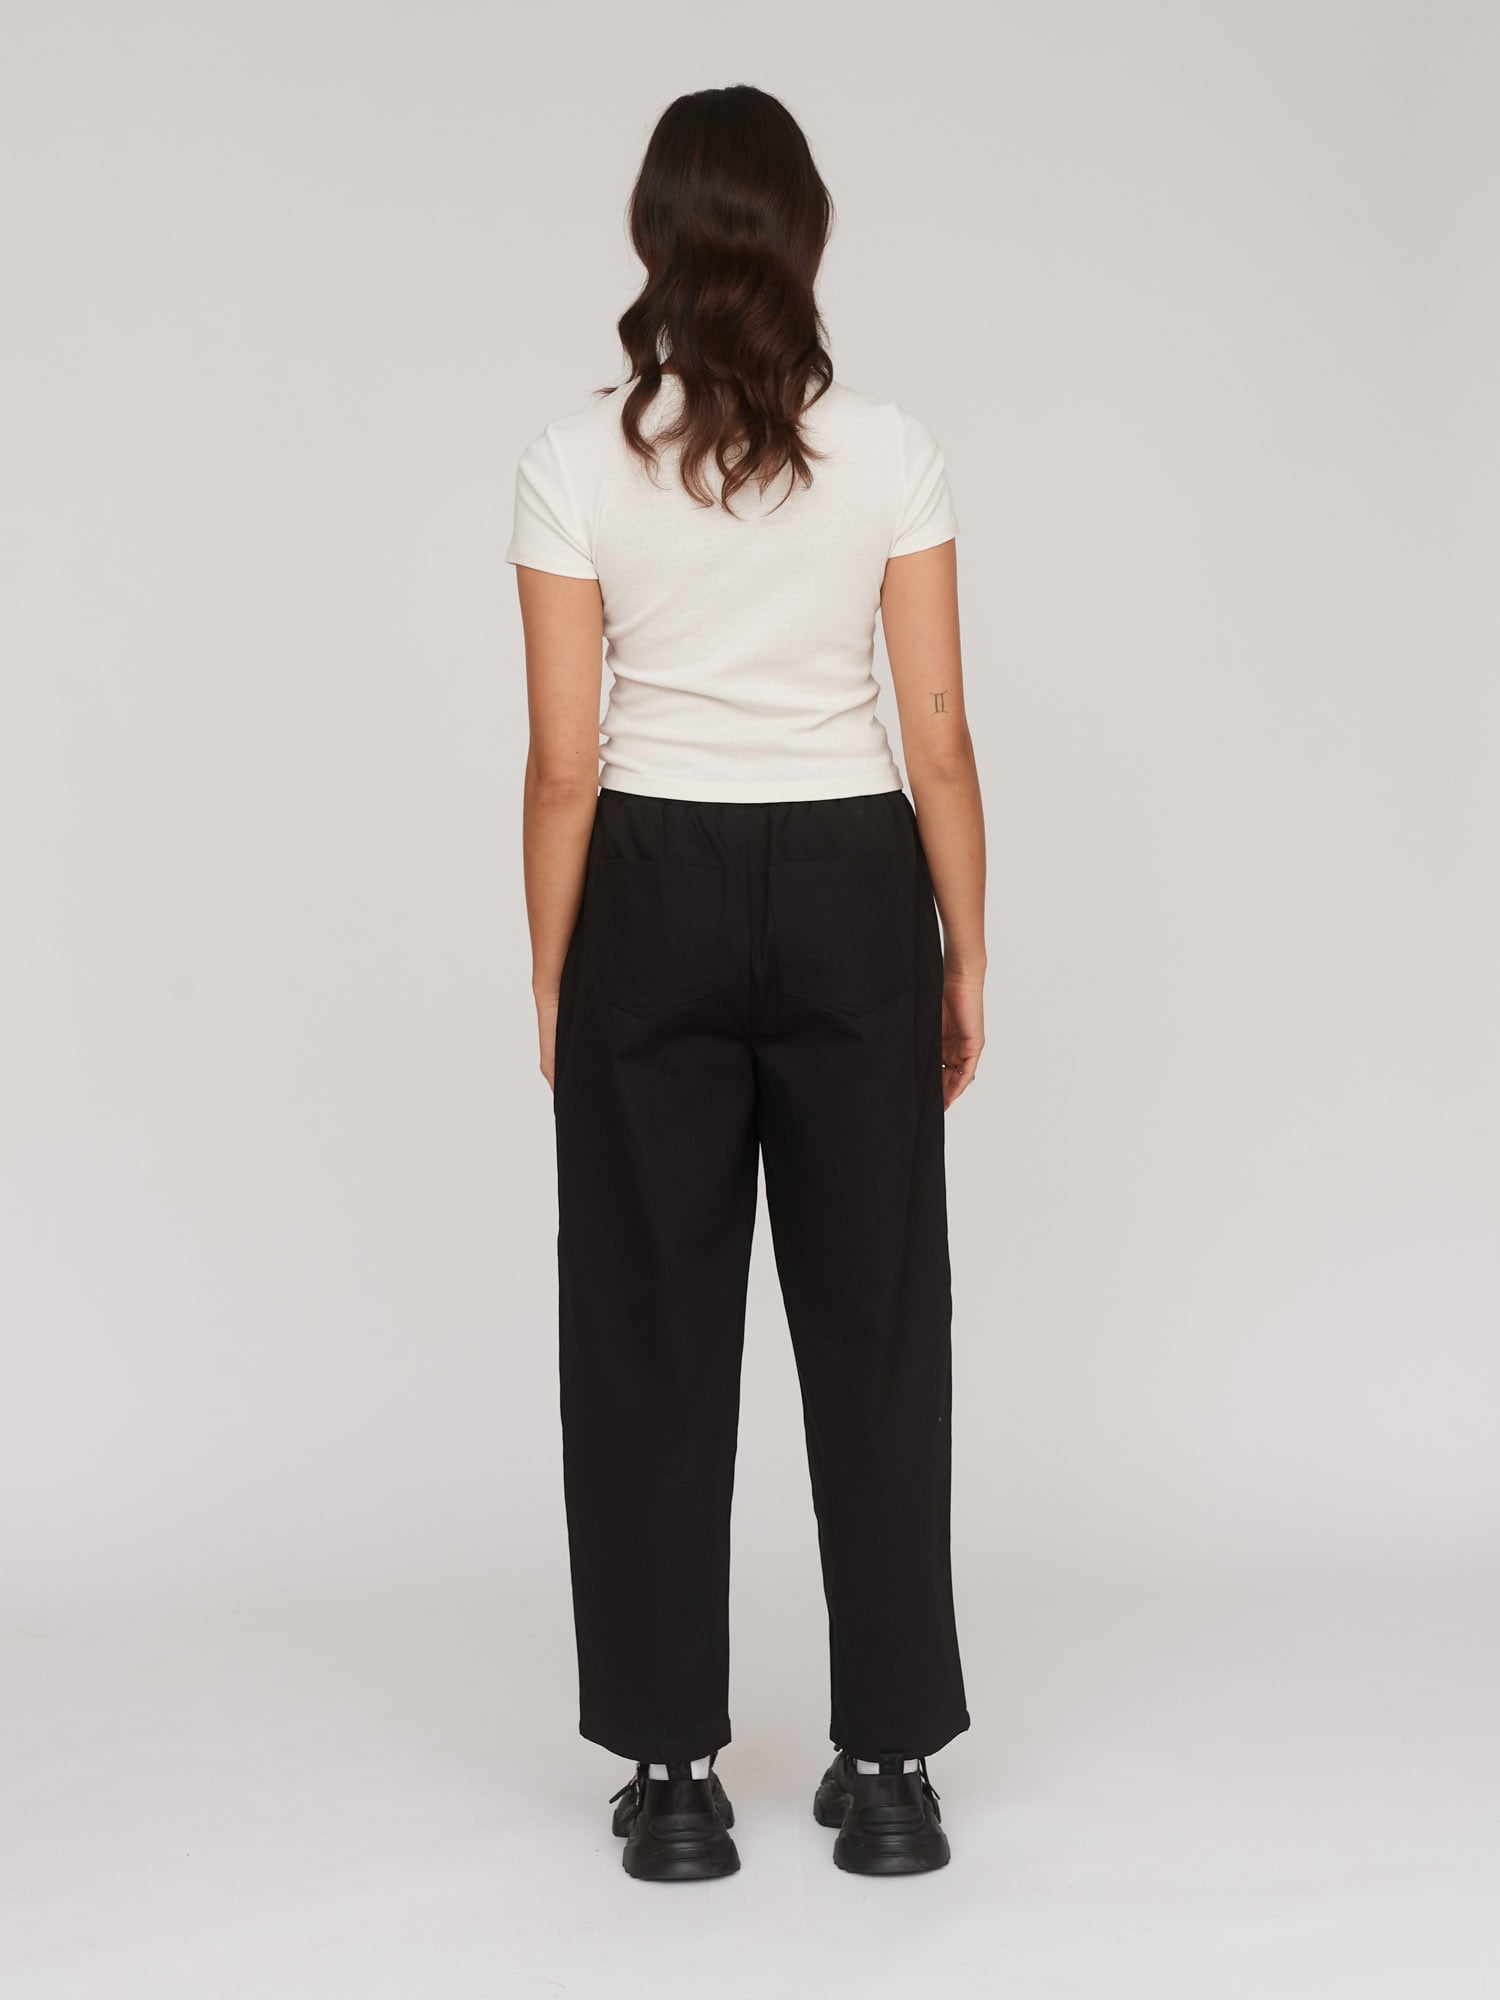 OUAT Black Work Trousers